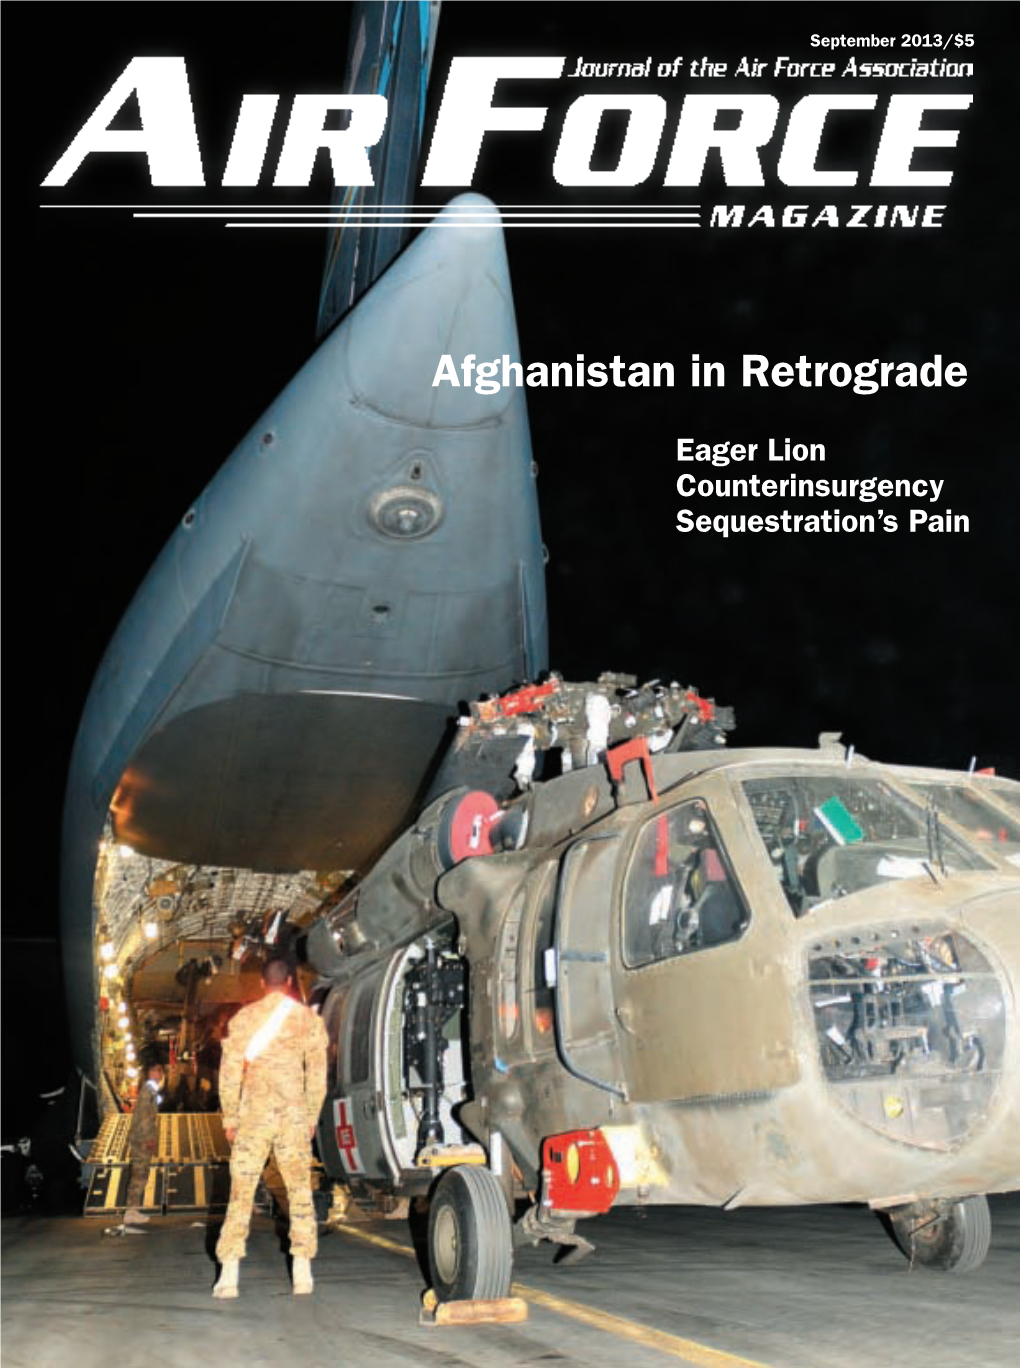 Afghanistan in Retrograde September 2013 Eager Lion Counterinsurgency Sequestration’S Pain Journal of the Air Force Association